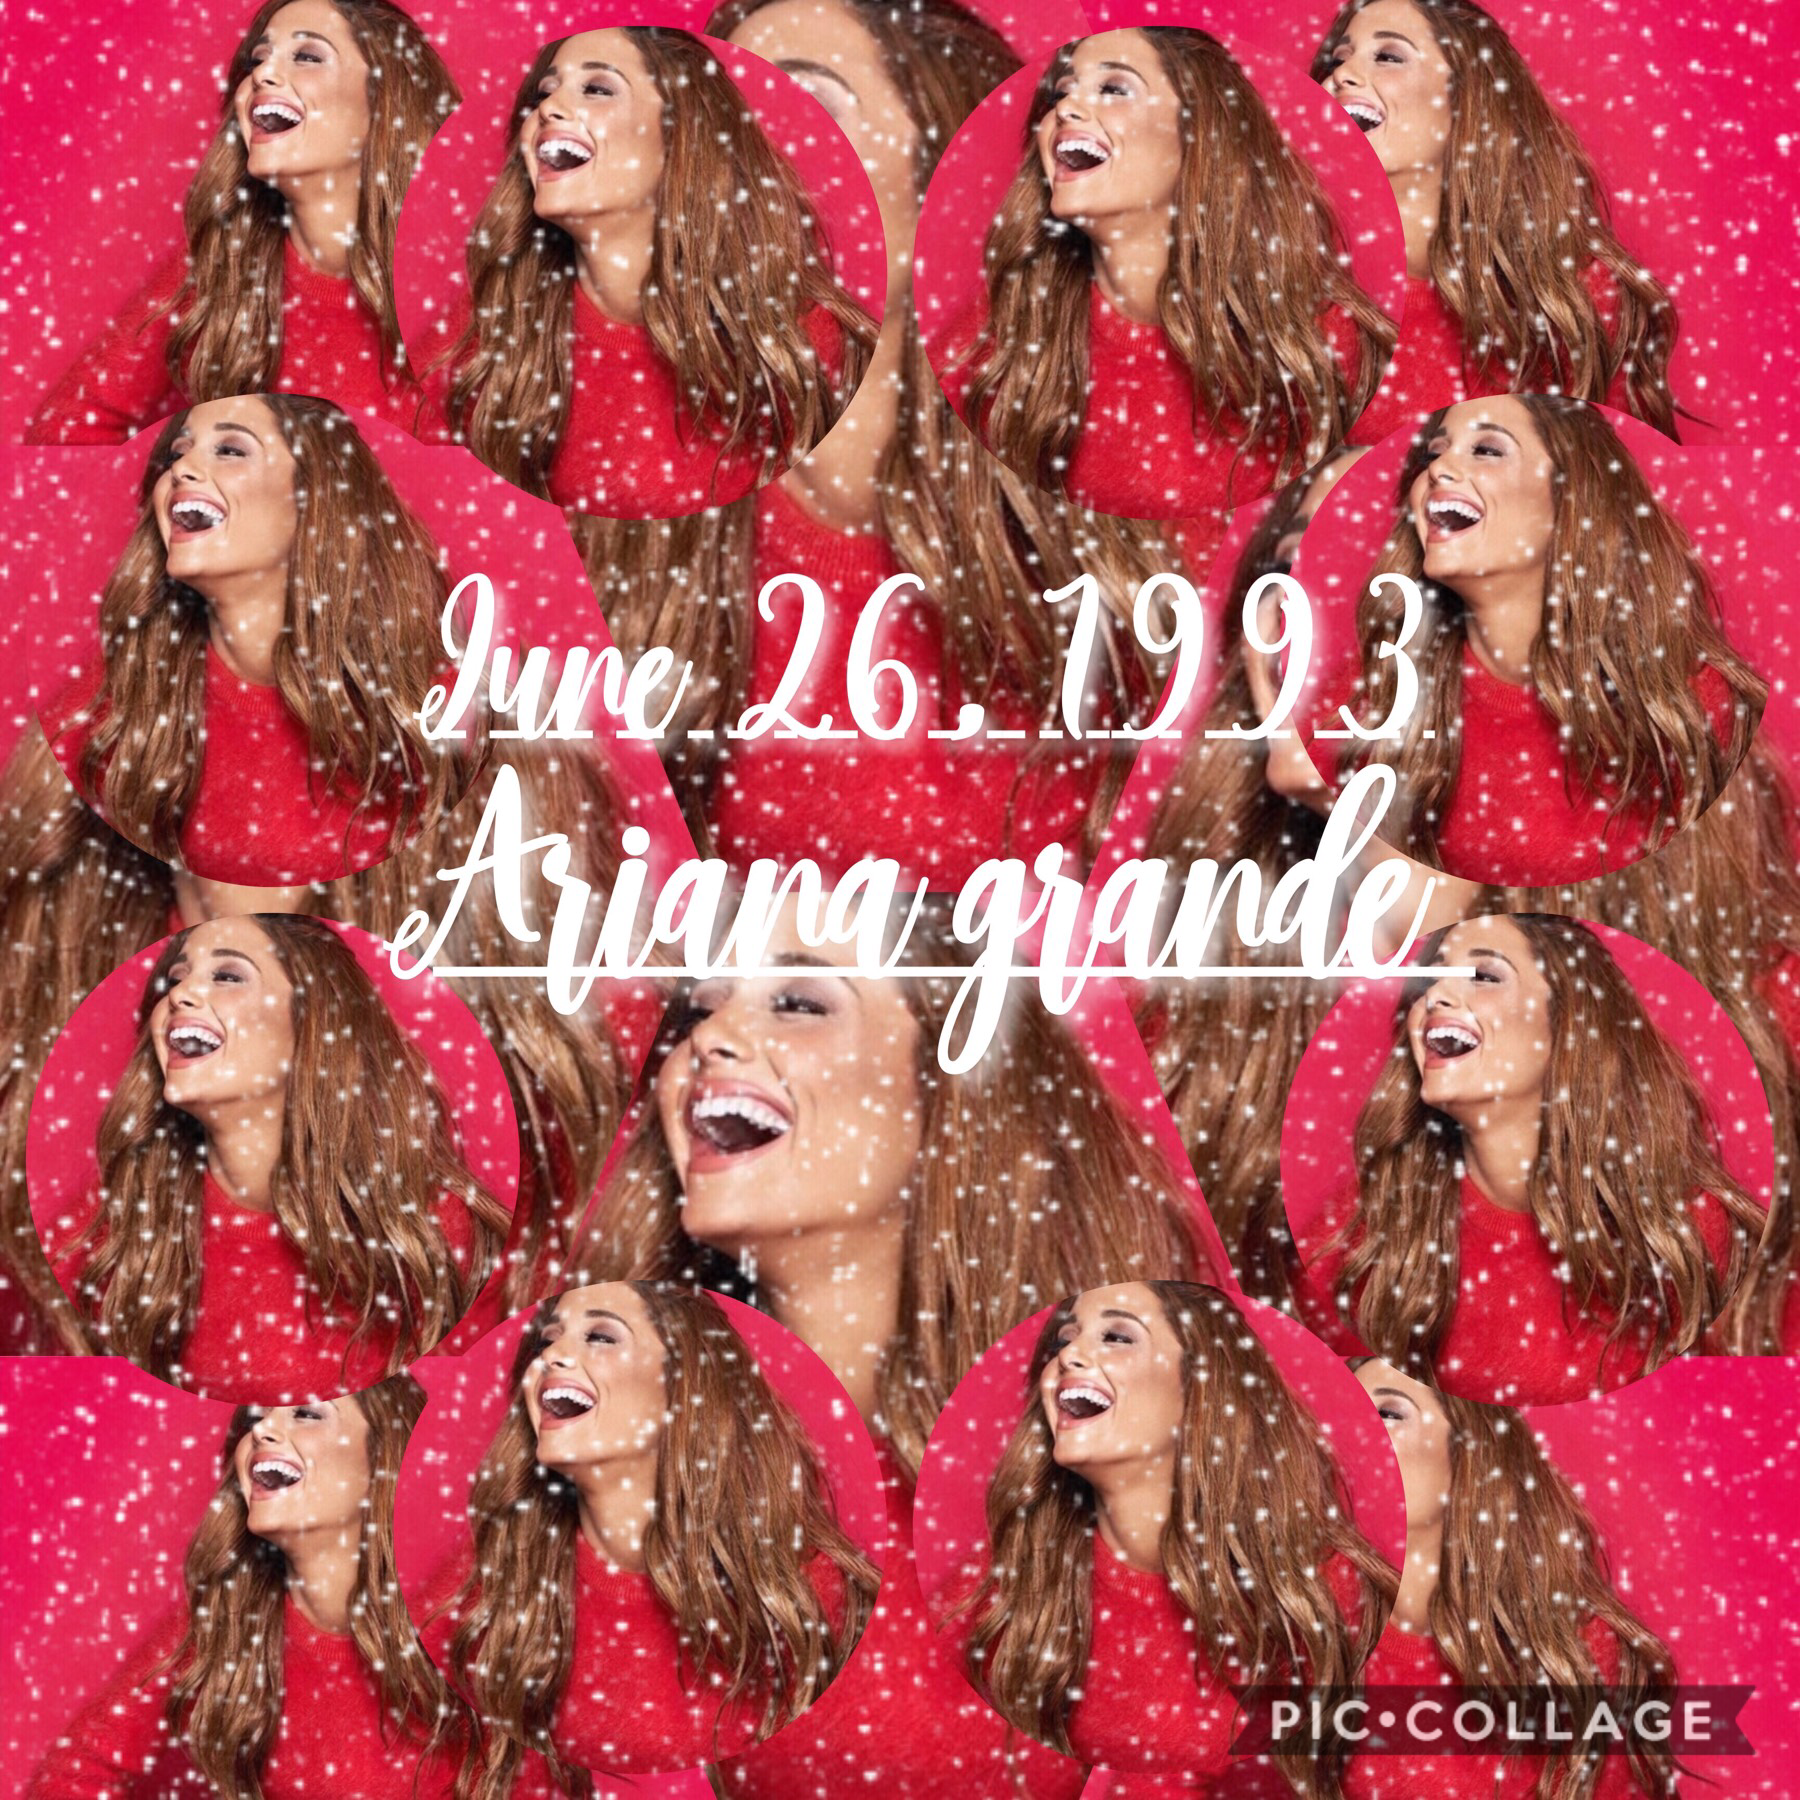 I know I’m late but happy birthday Ariana Grande!!! QOTD- does anyone actually want me to change my name? AOTD- be honest like a couple of you are and others didn’t really say if they want me to or not 